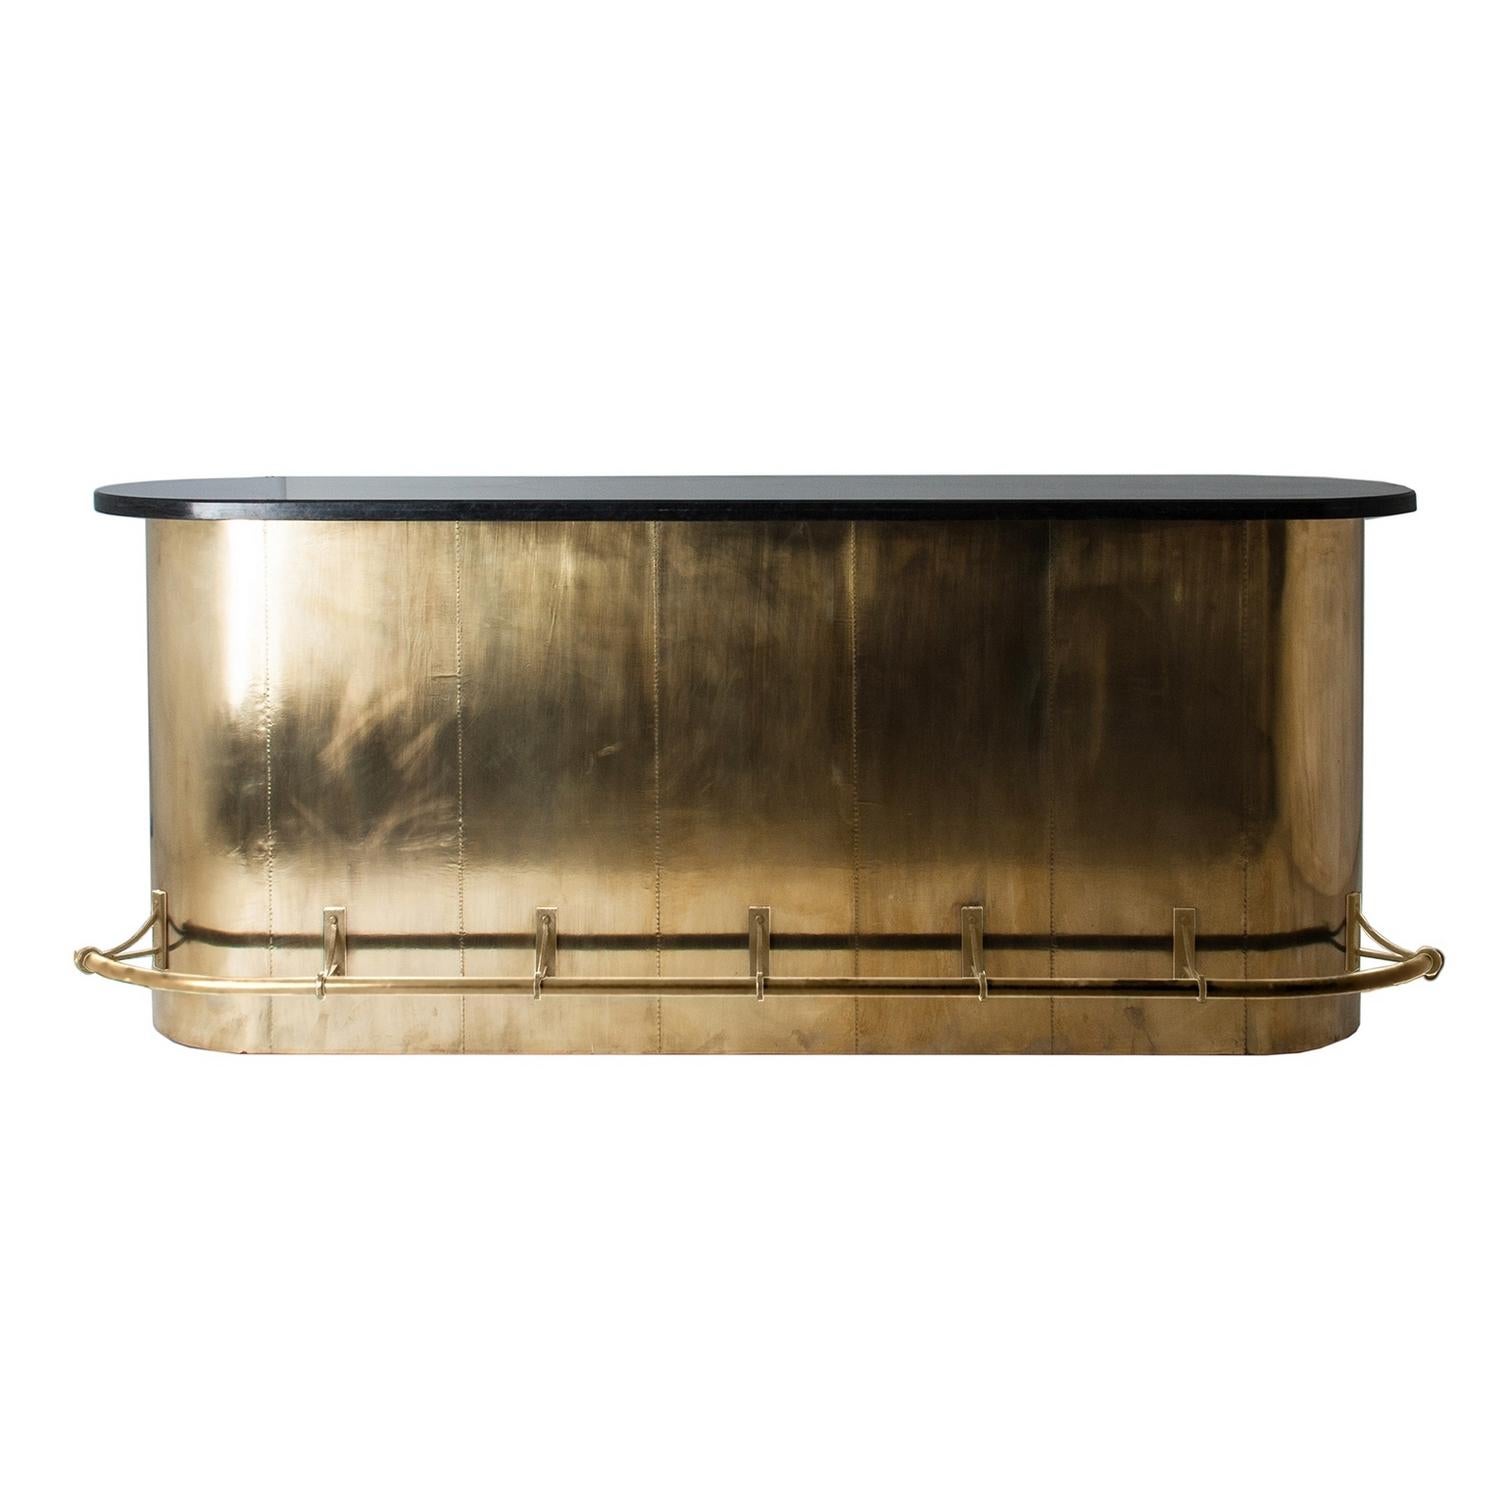 Oval black bevelled quartz marble stone tray, curved and rounded lines bar or counter table sparkling and sophisticated with black lacquered wooden and brass finishes, opening shelves spaces on the other side. Amazing!